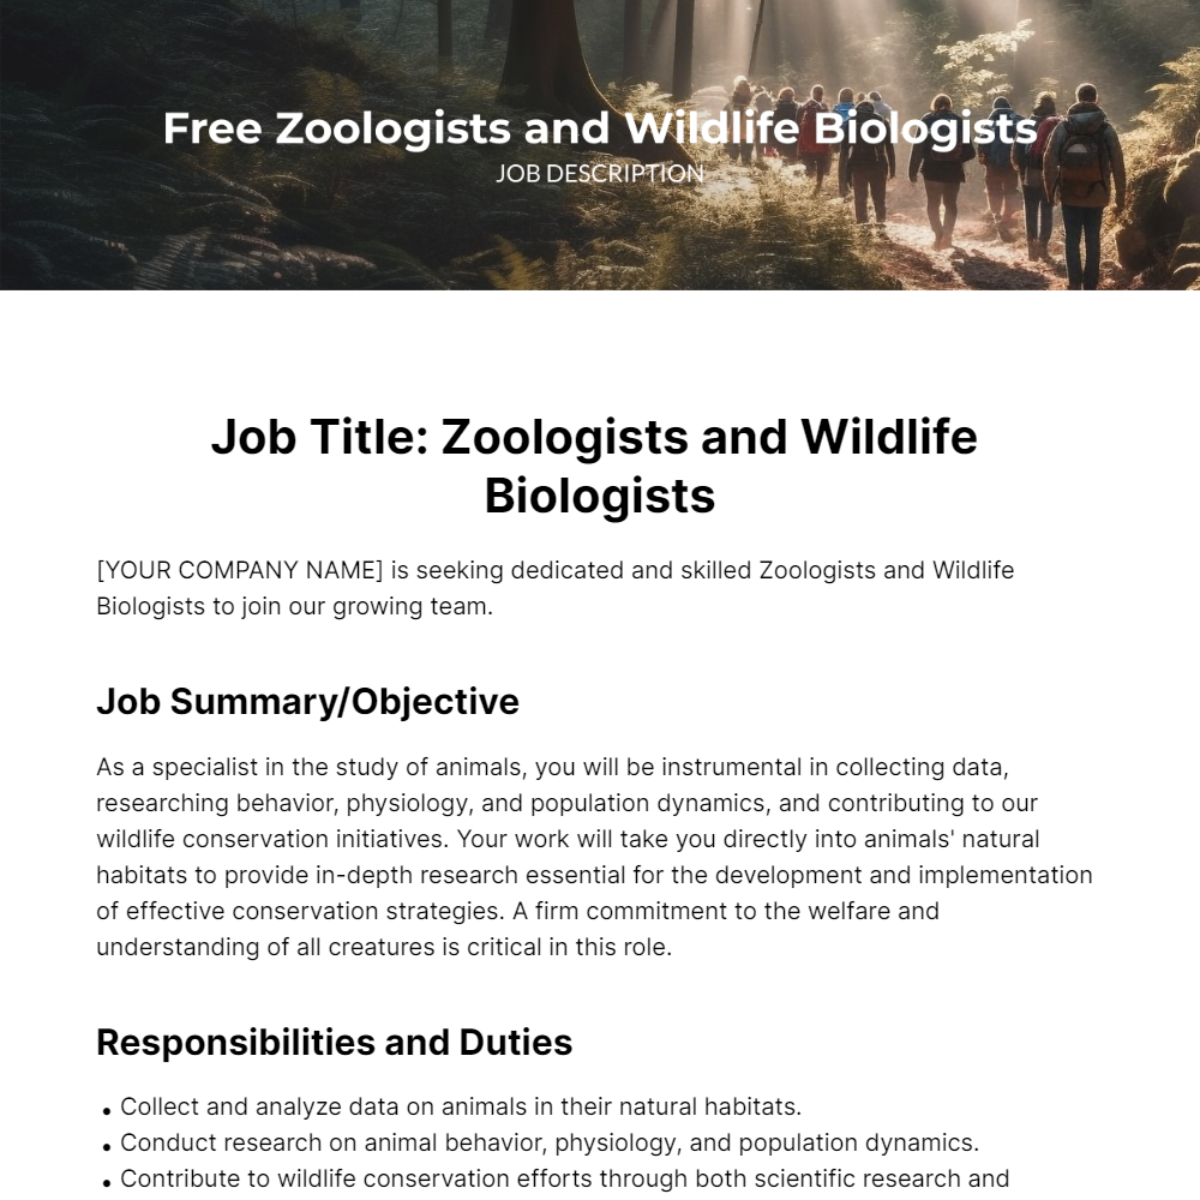 Free Zoologists and Wildlife Biologists Job Description Template